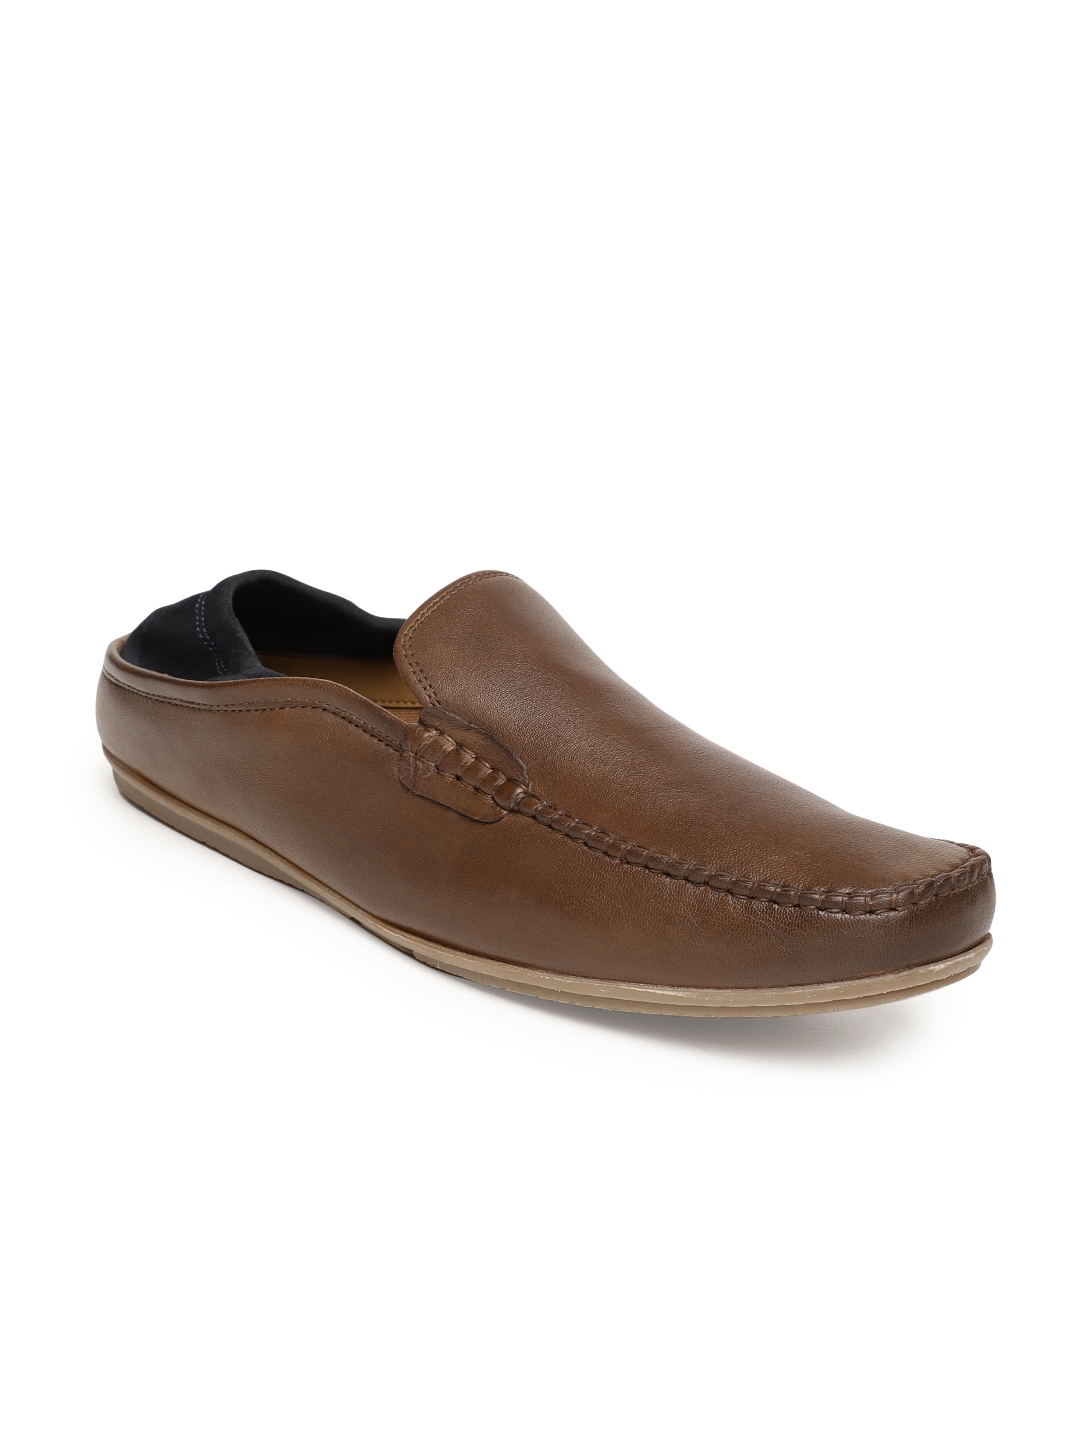 Buy Ruosh Men Tan Leather Loafers - Casual Shoes for Men 6546297 | Myntra